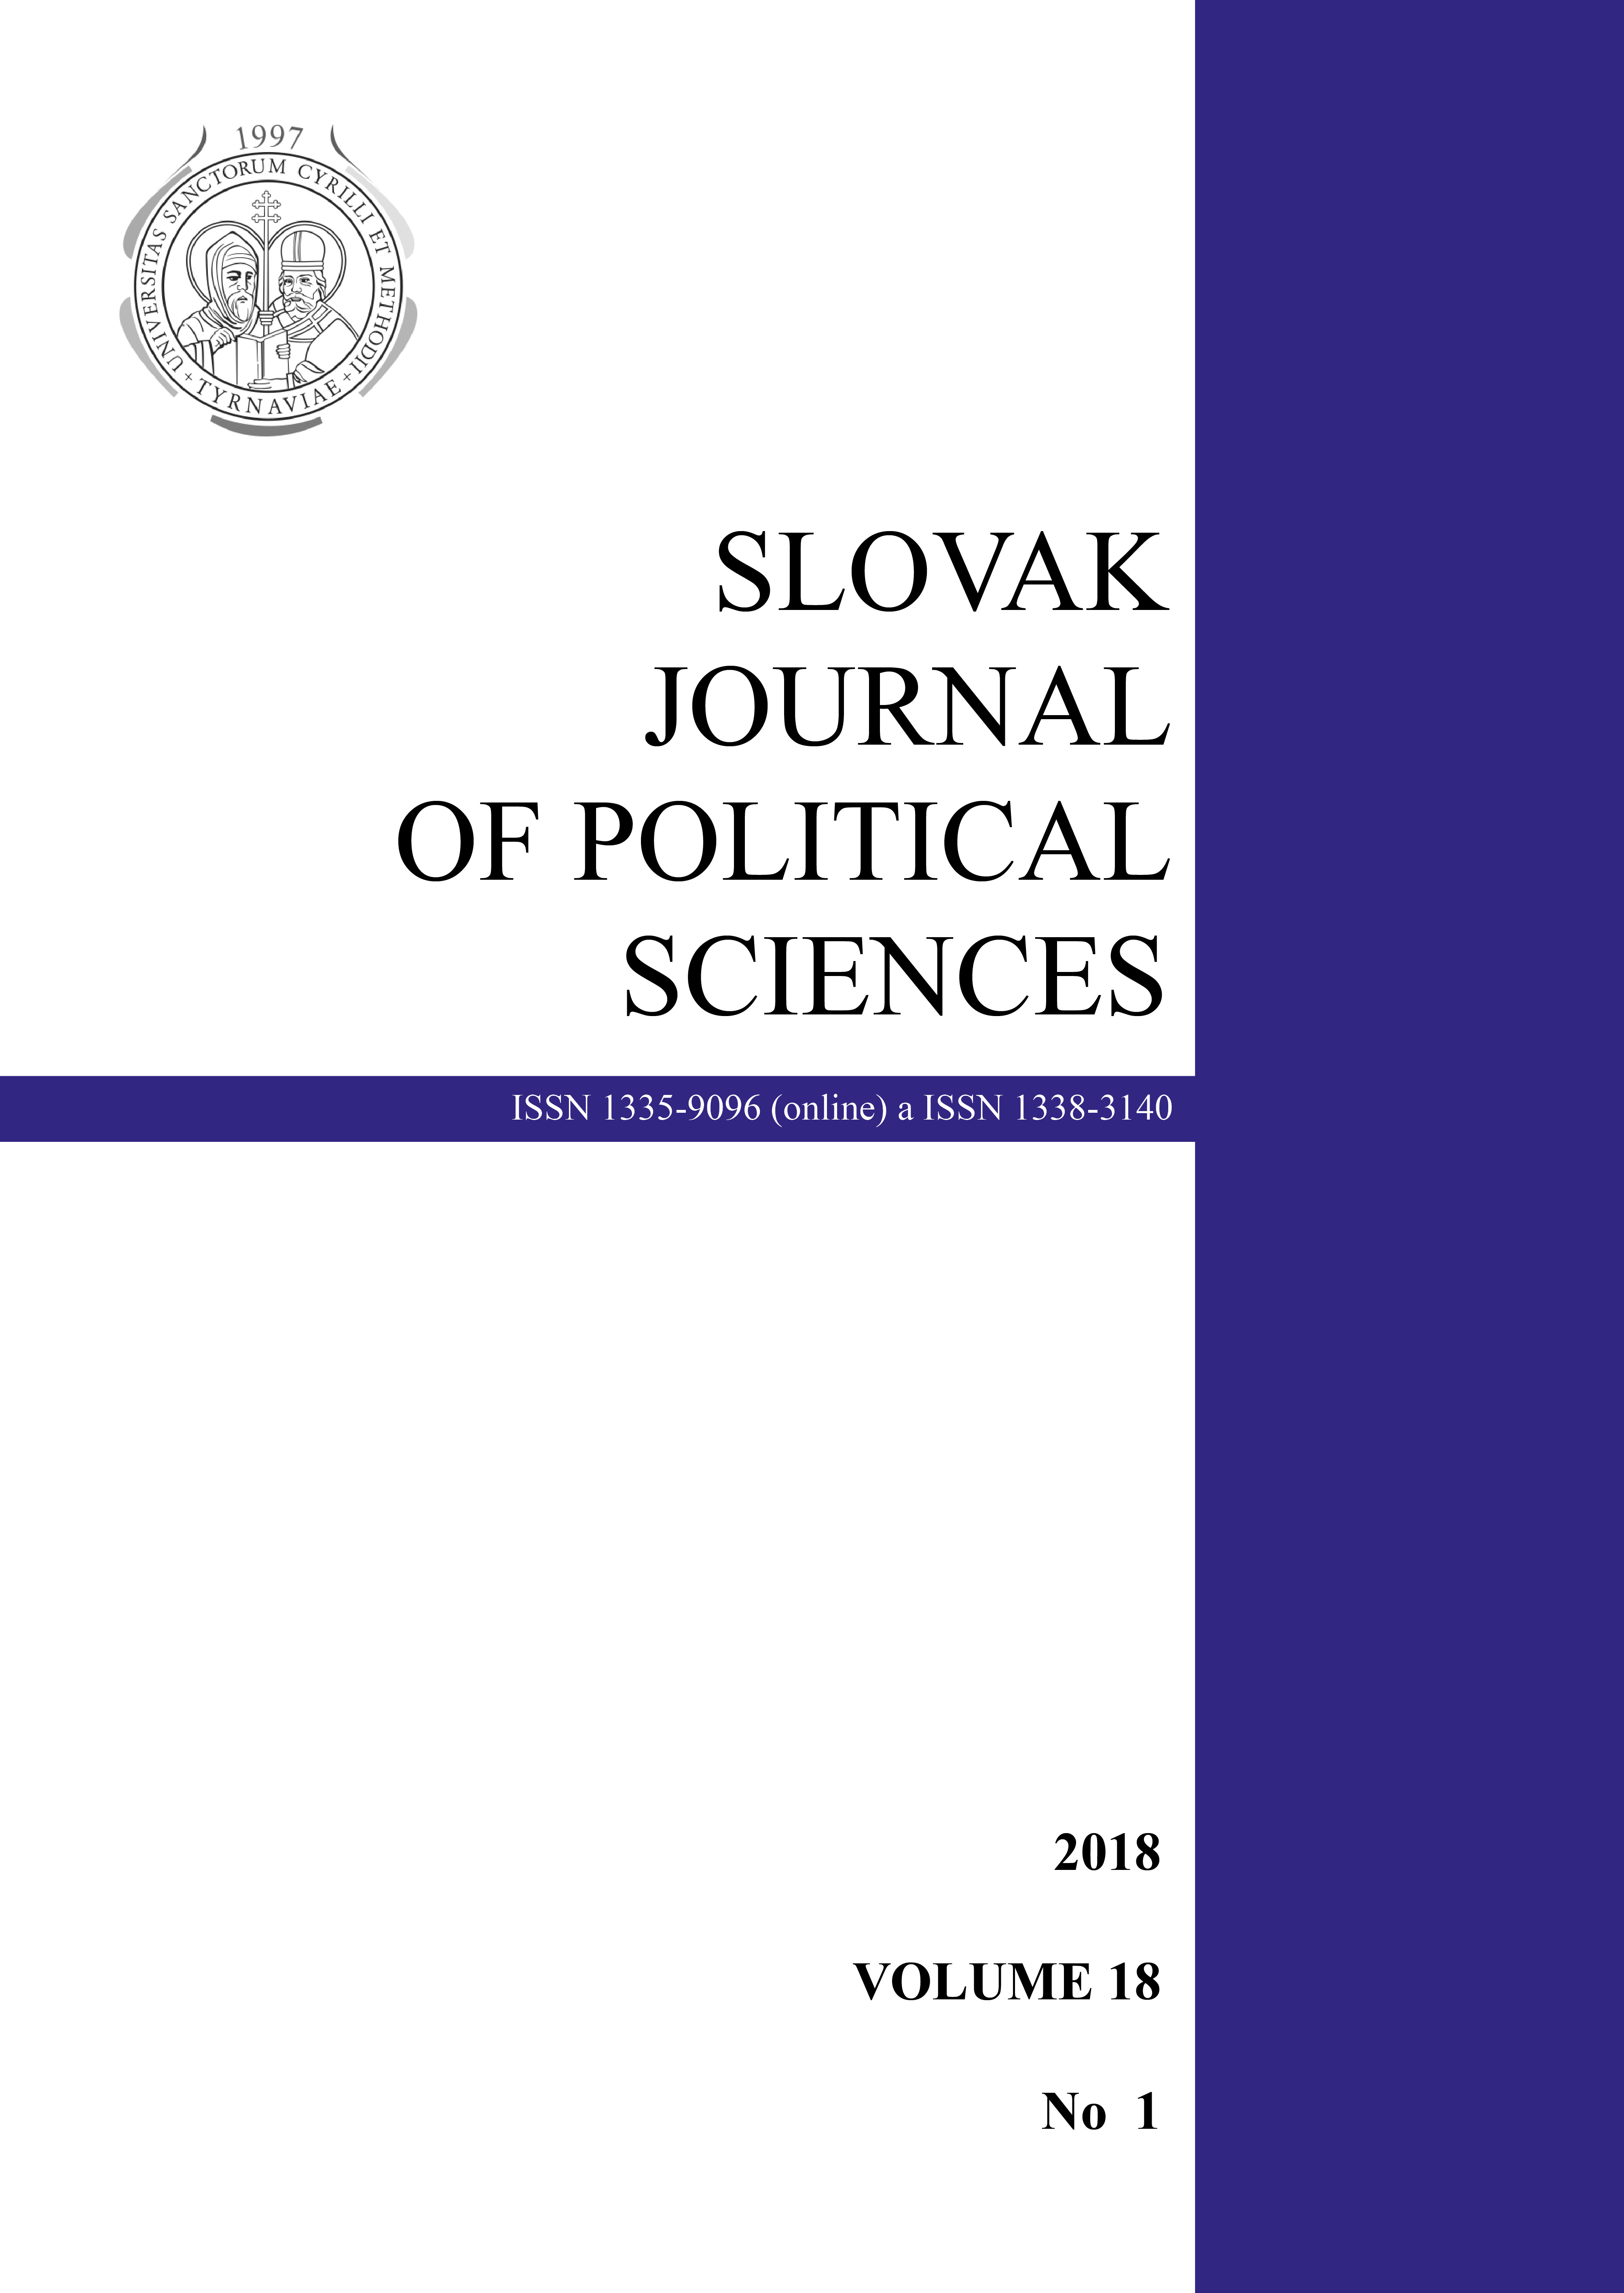 “We Have Decided to Guarantee the Continuity of the Universities Long-Time Funding”: The Political Rhetoric of the Ministers of Education and the Reform of University Funding During 2005—2015 In Finland